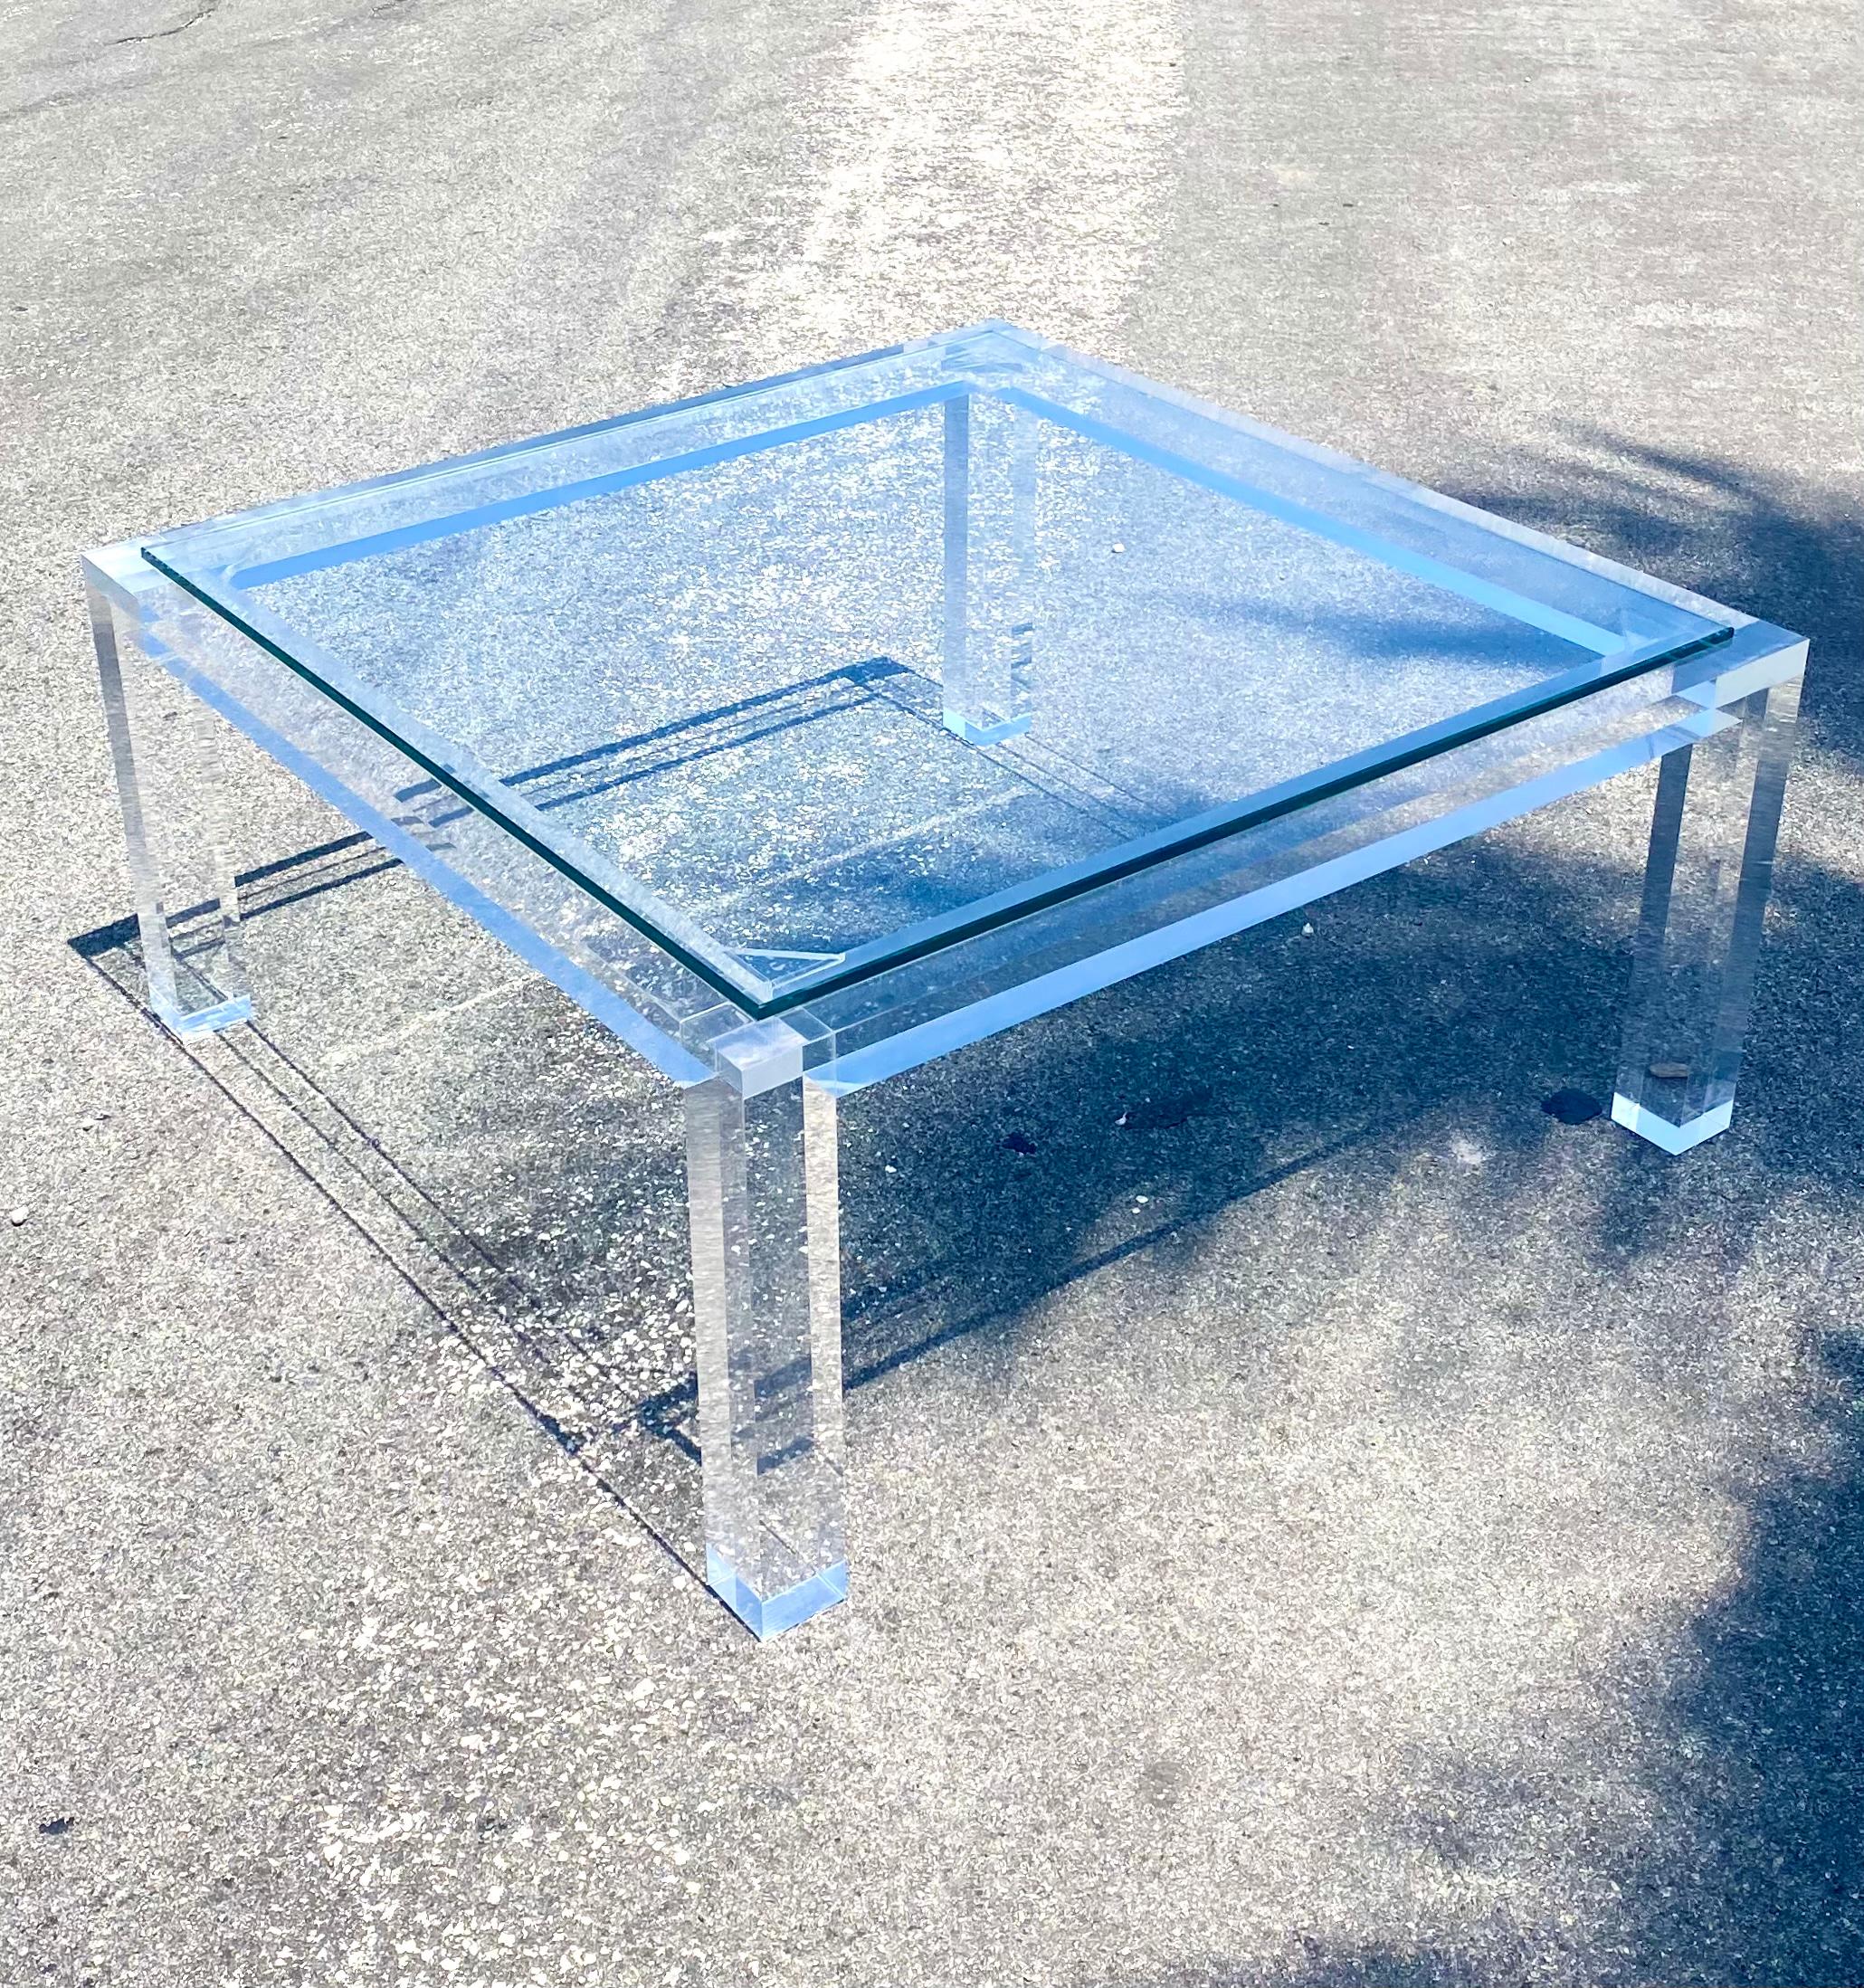 Stunning vintage Regency coffee table. Thick slab lucite in a contemporary square design. Glass tops rests on the surface. A really chic addition to any decor. Acquired from a Palm Beach estate.